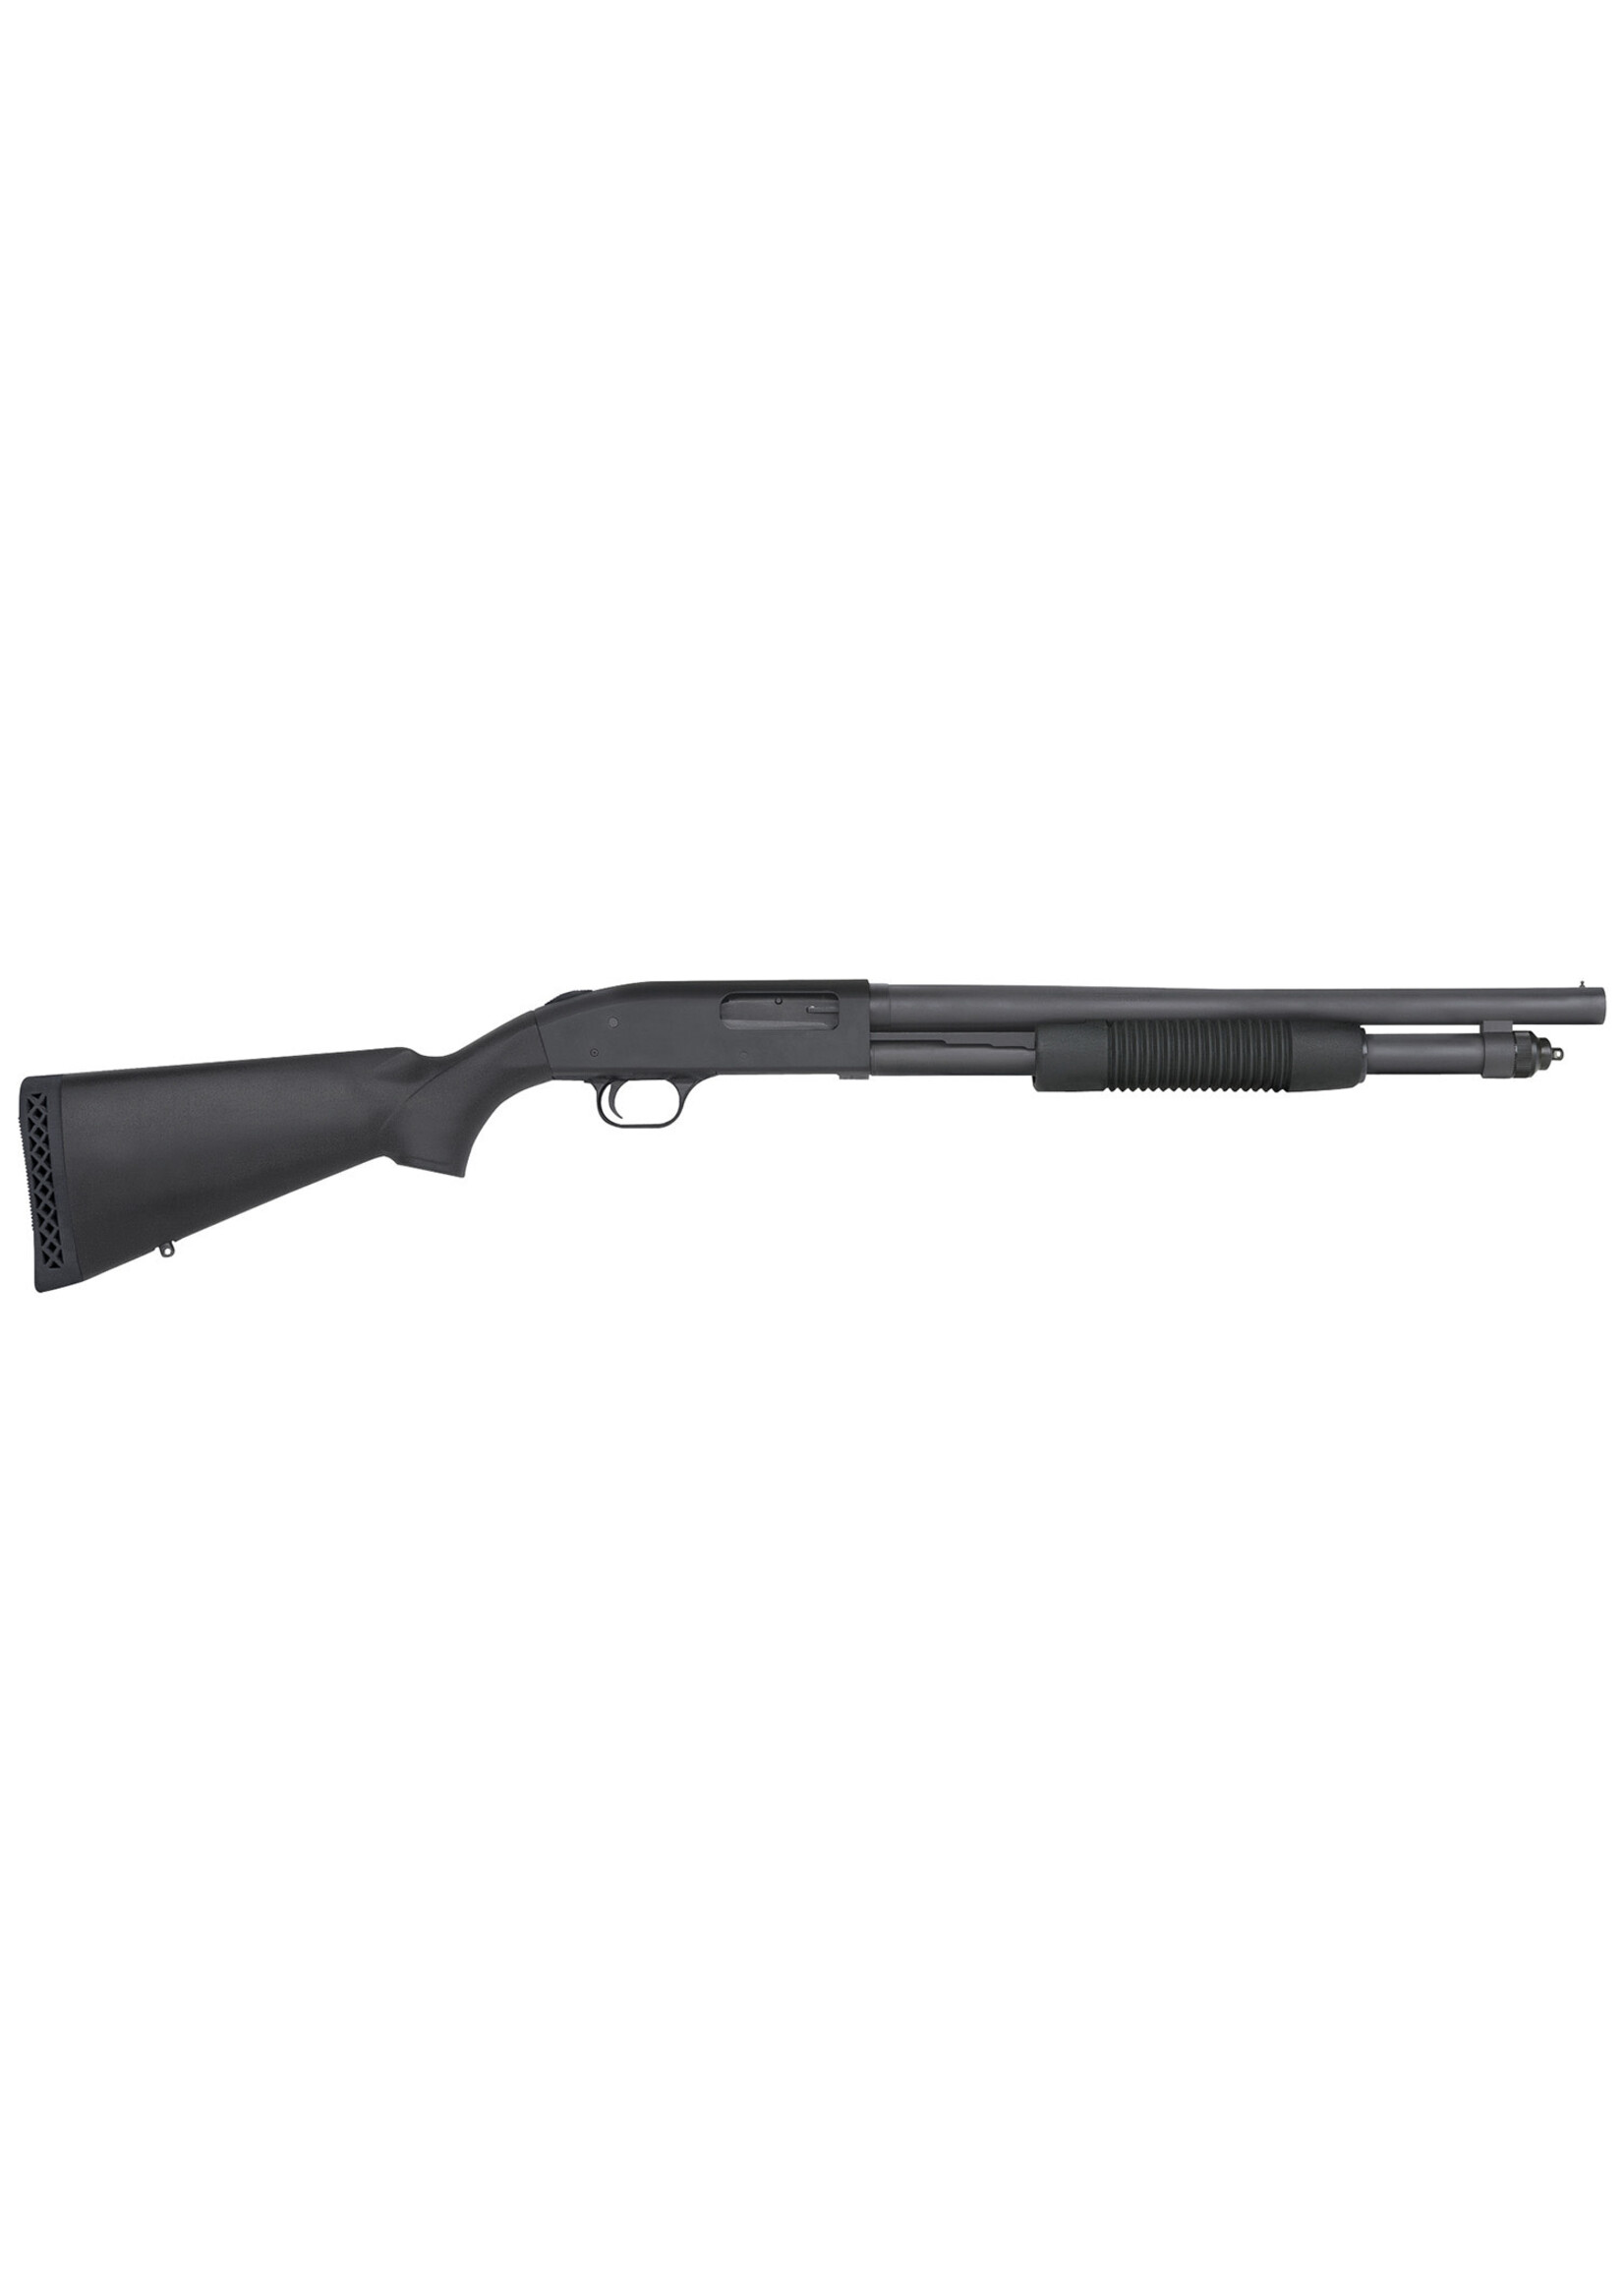 Mossberg SPECIAL ORDER Mossberg 50778 590 Tactical 12 Gauge 6+1 3" 18.50" Cylinder Bore Barrel, Matte Blued Metal Finish, Dual Extractors, Drilled & Tapped Receiver, Synthetic Stock